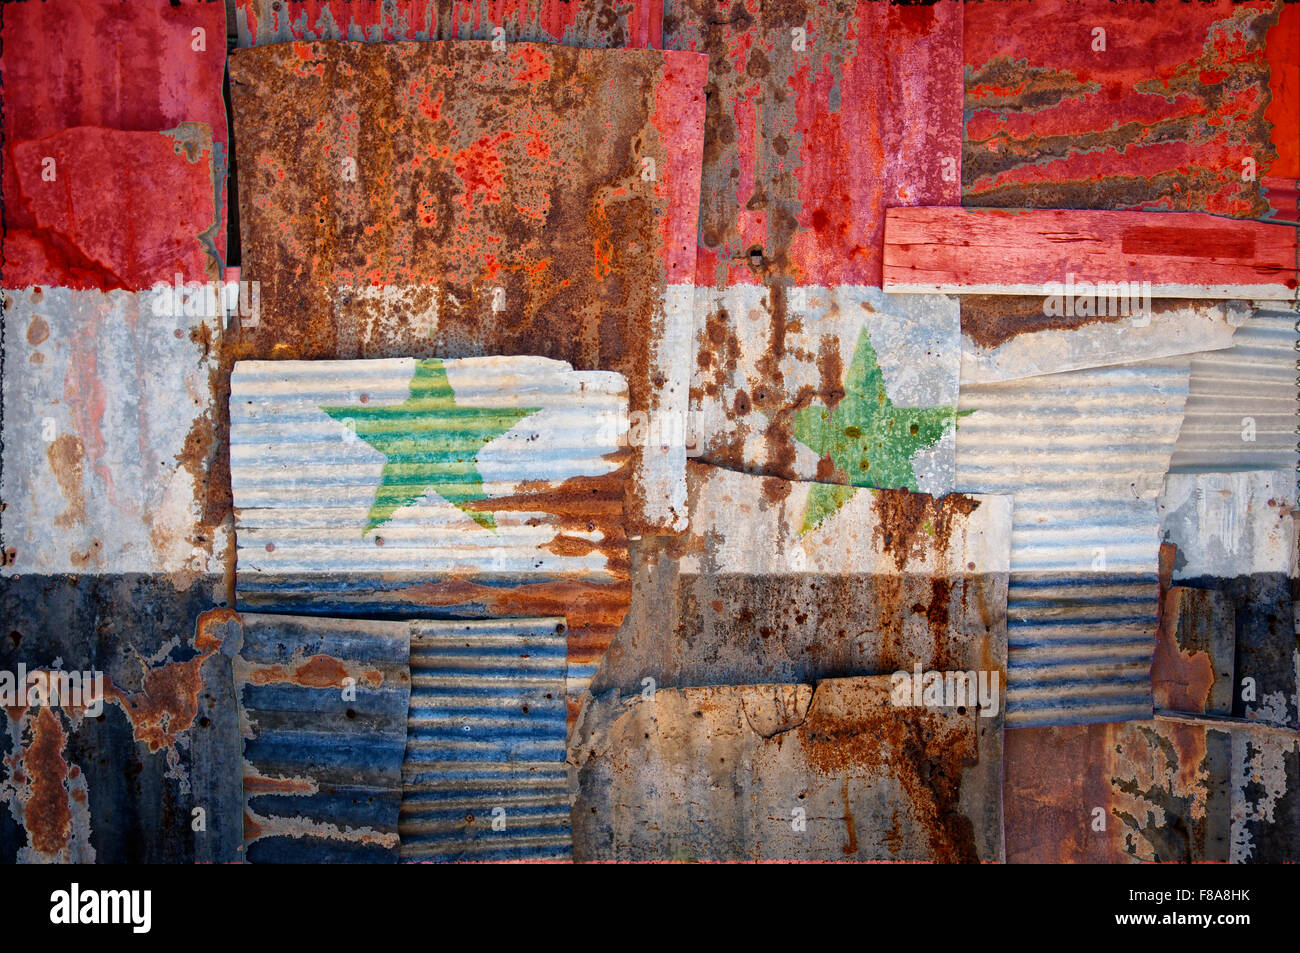 An abstract background image of the flag of Syria painted on to rusty corrugated iron sheets overlapping to form a wall or fence Stock Photo